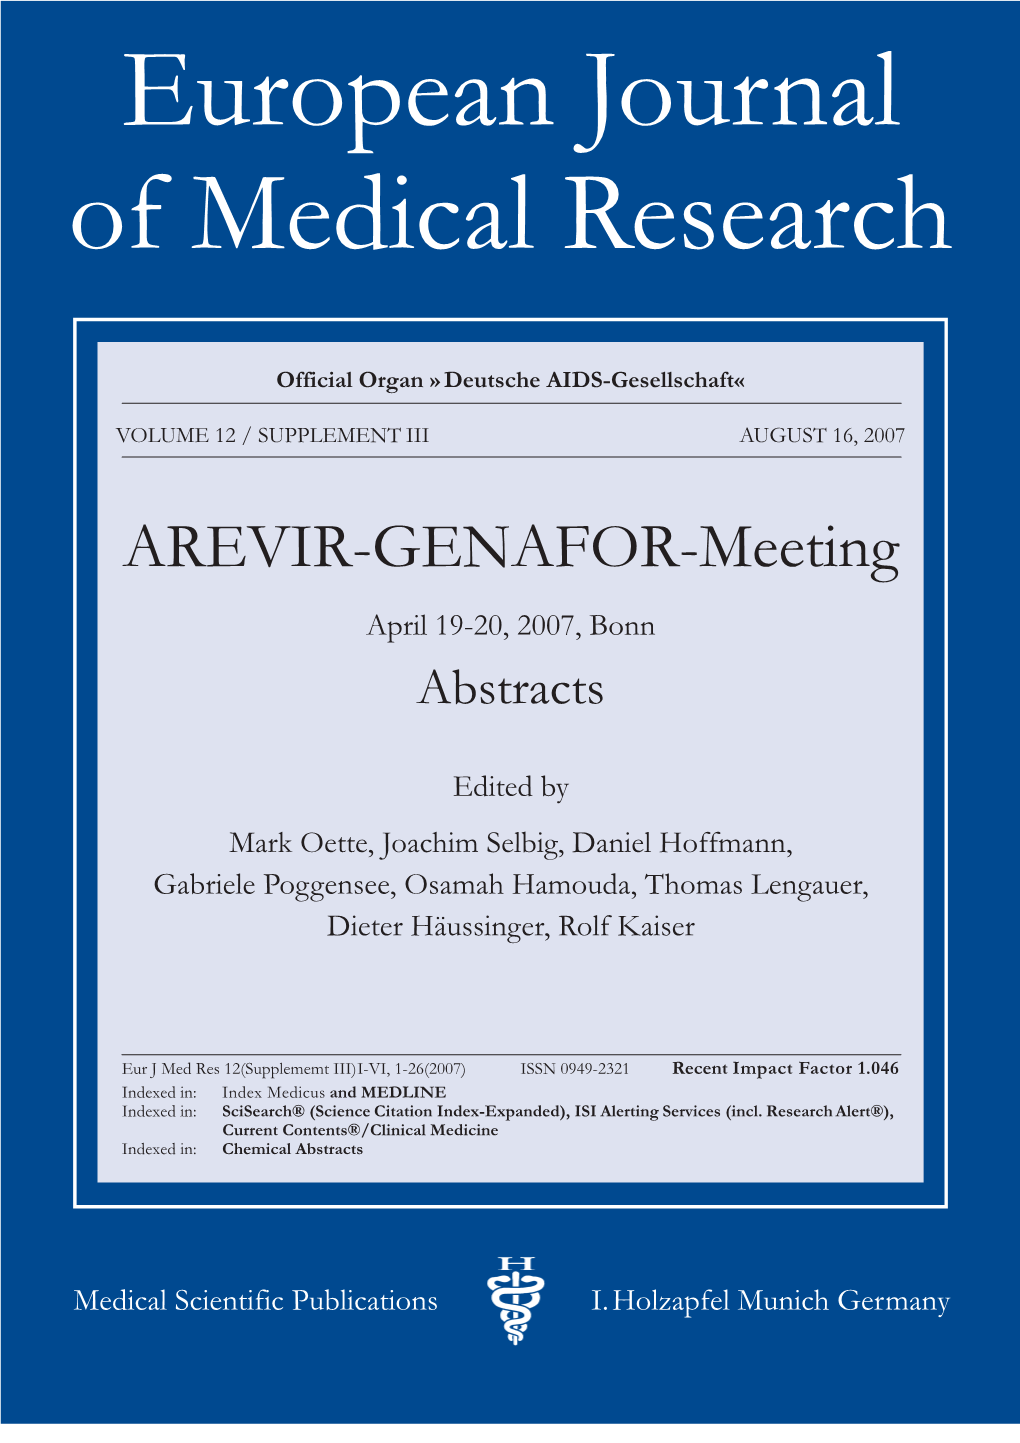 European Journal of Medical Research